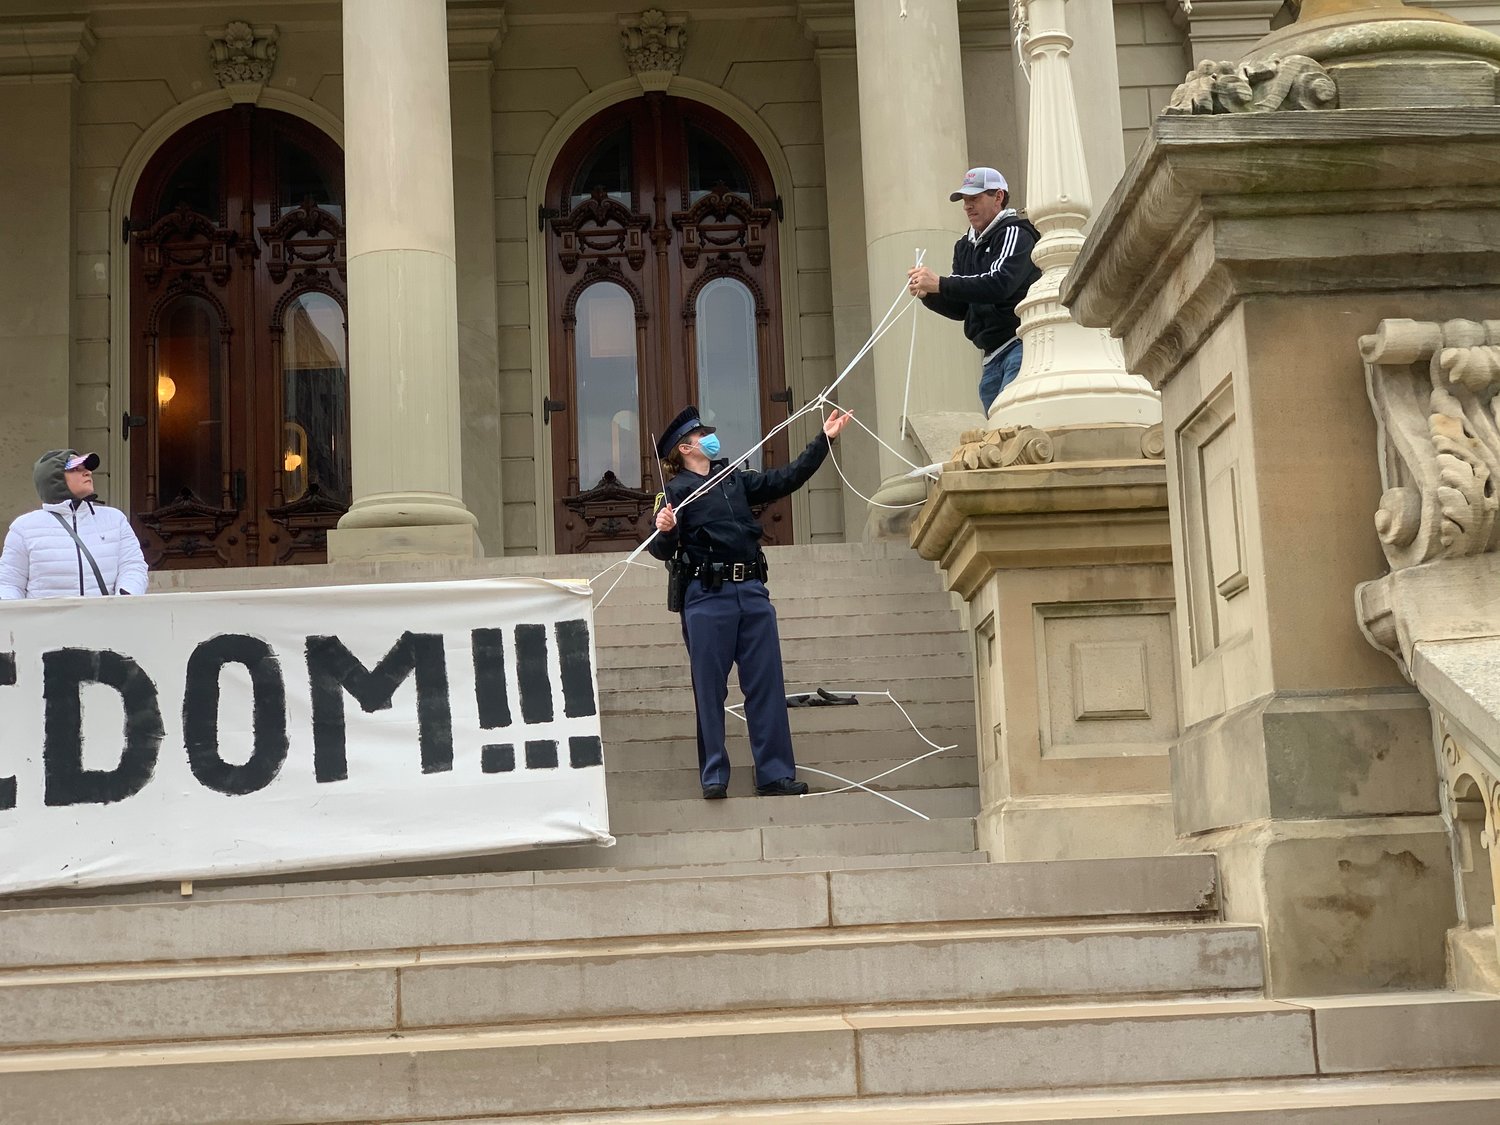 At least one Michigan State Police officer helped demonstrators hang a “Freeedom!!!” sign over the steps of the State Capitol building today.